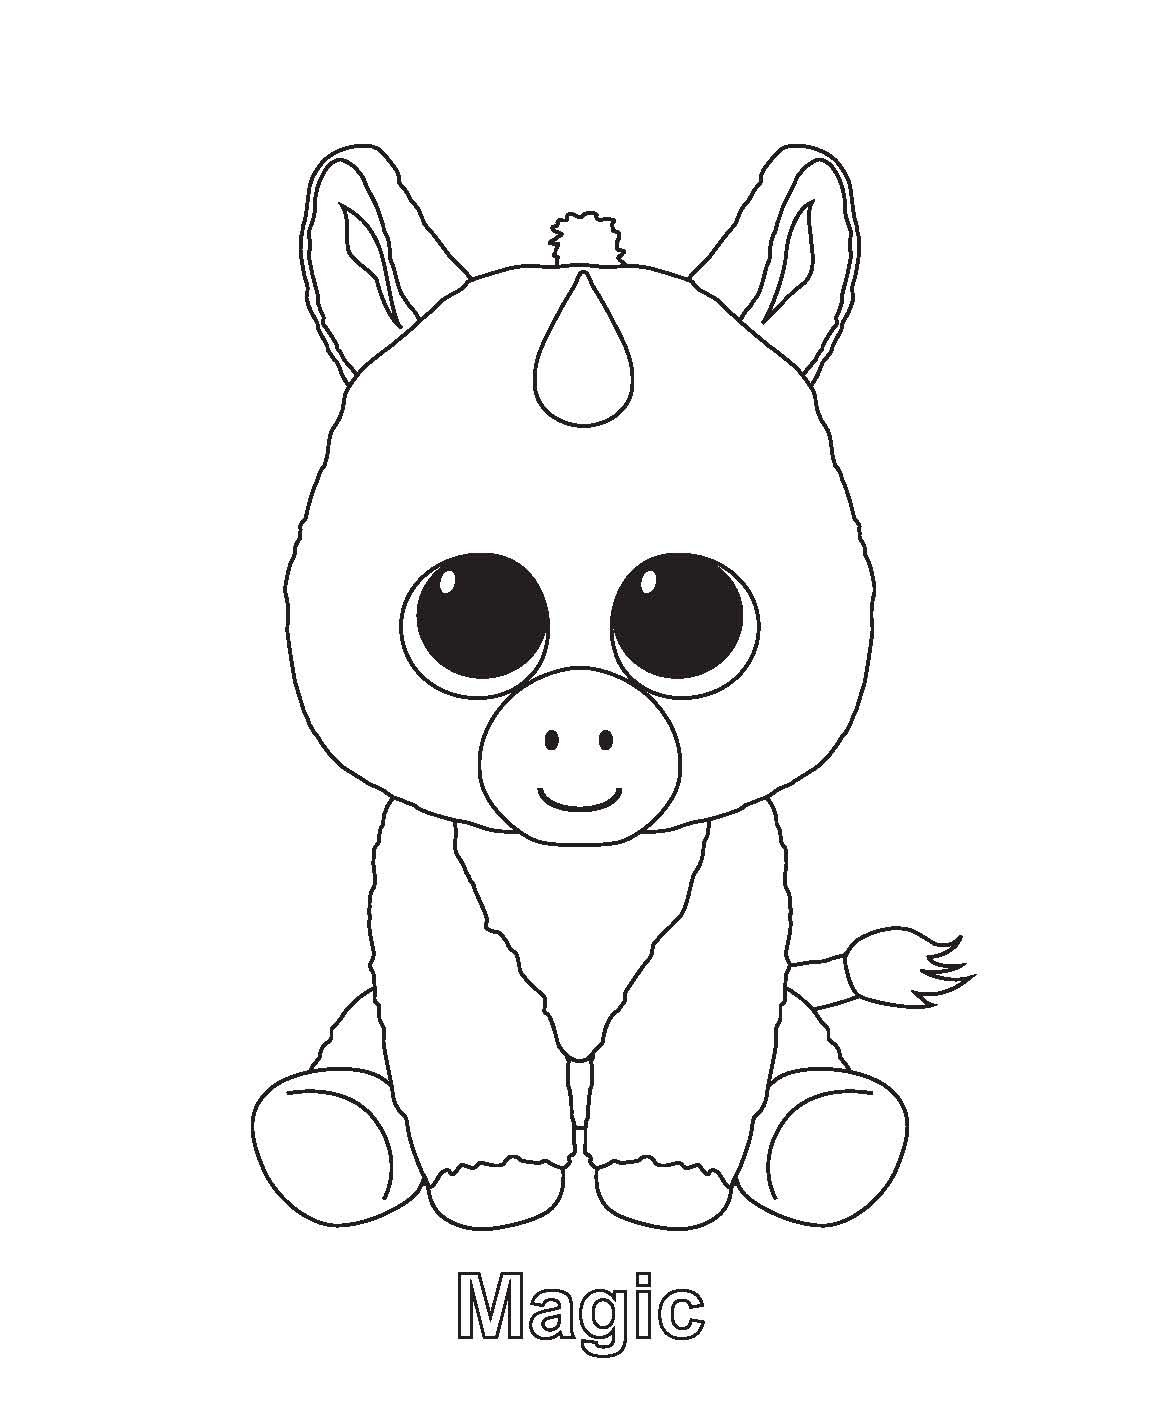 Ty Beanie Boo Coloring Pages Download And Print For Free | C&amp;#039;s Pet - Free Printable Beanie Boo Coloring Pages